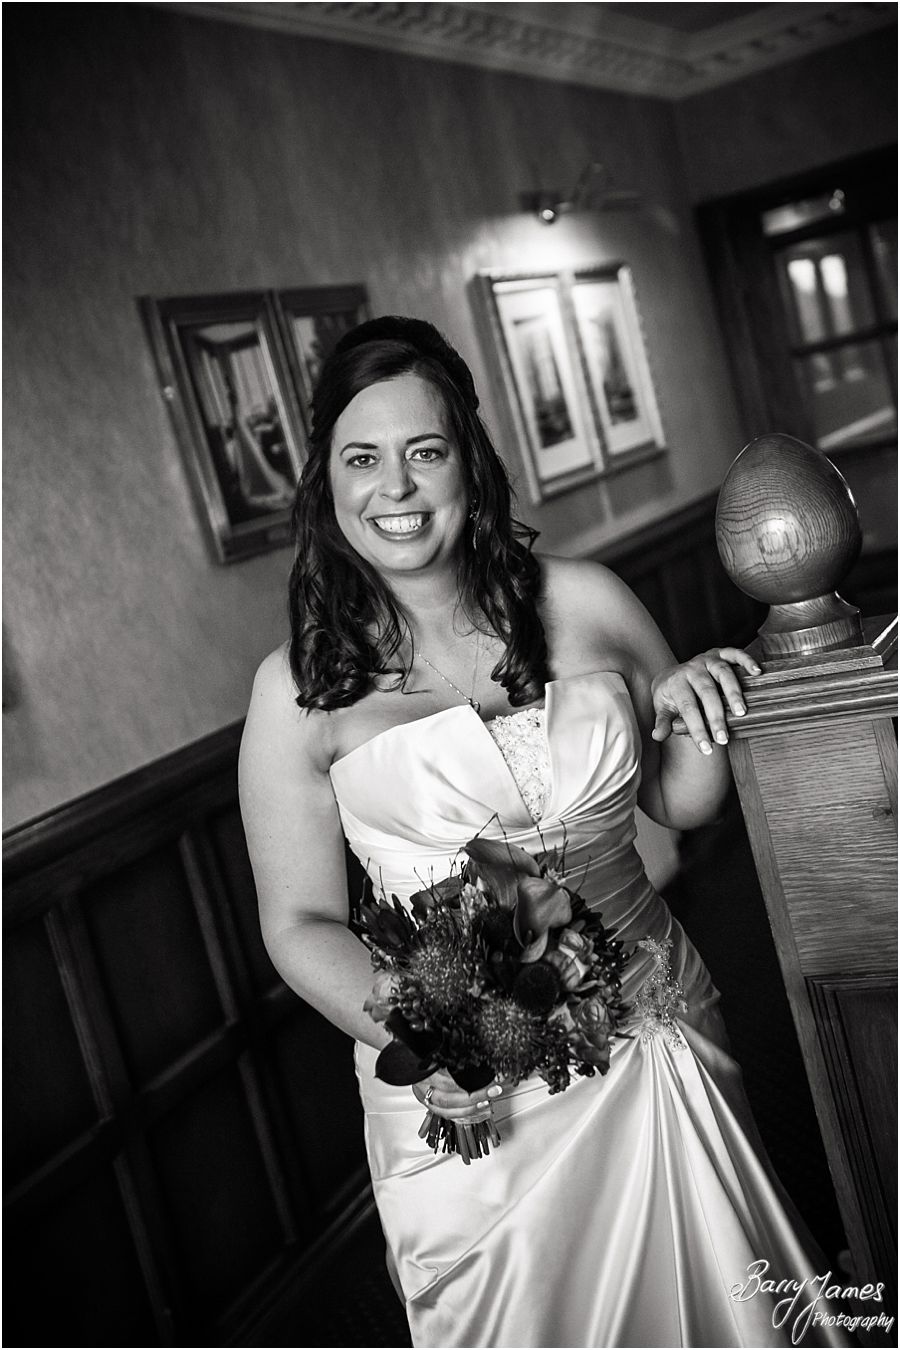 Gorgeous wedding photographs in The Moat House in Acton Trussell by Stafford Wedding Photographer Barry James